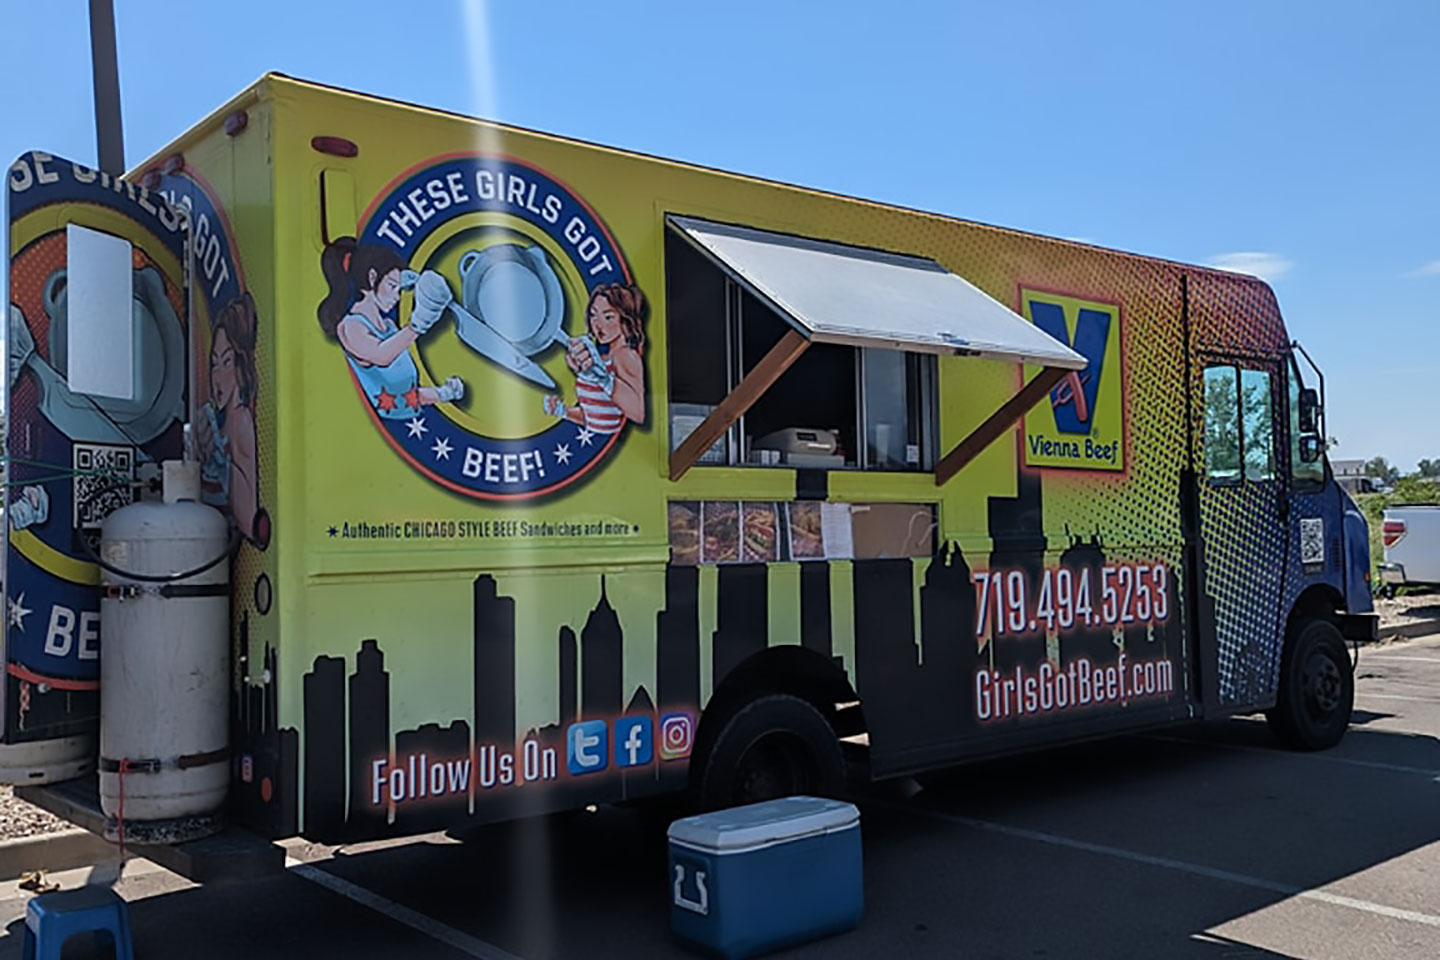 These Girls Got Beef is a woman-owned food truck serving authentic Chicago style beef sandwiches and Vienna beef dogs in Colorado Springs. https://www.facebook.com/girlsgotbeef/